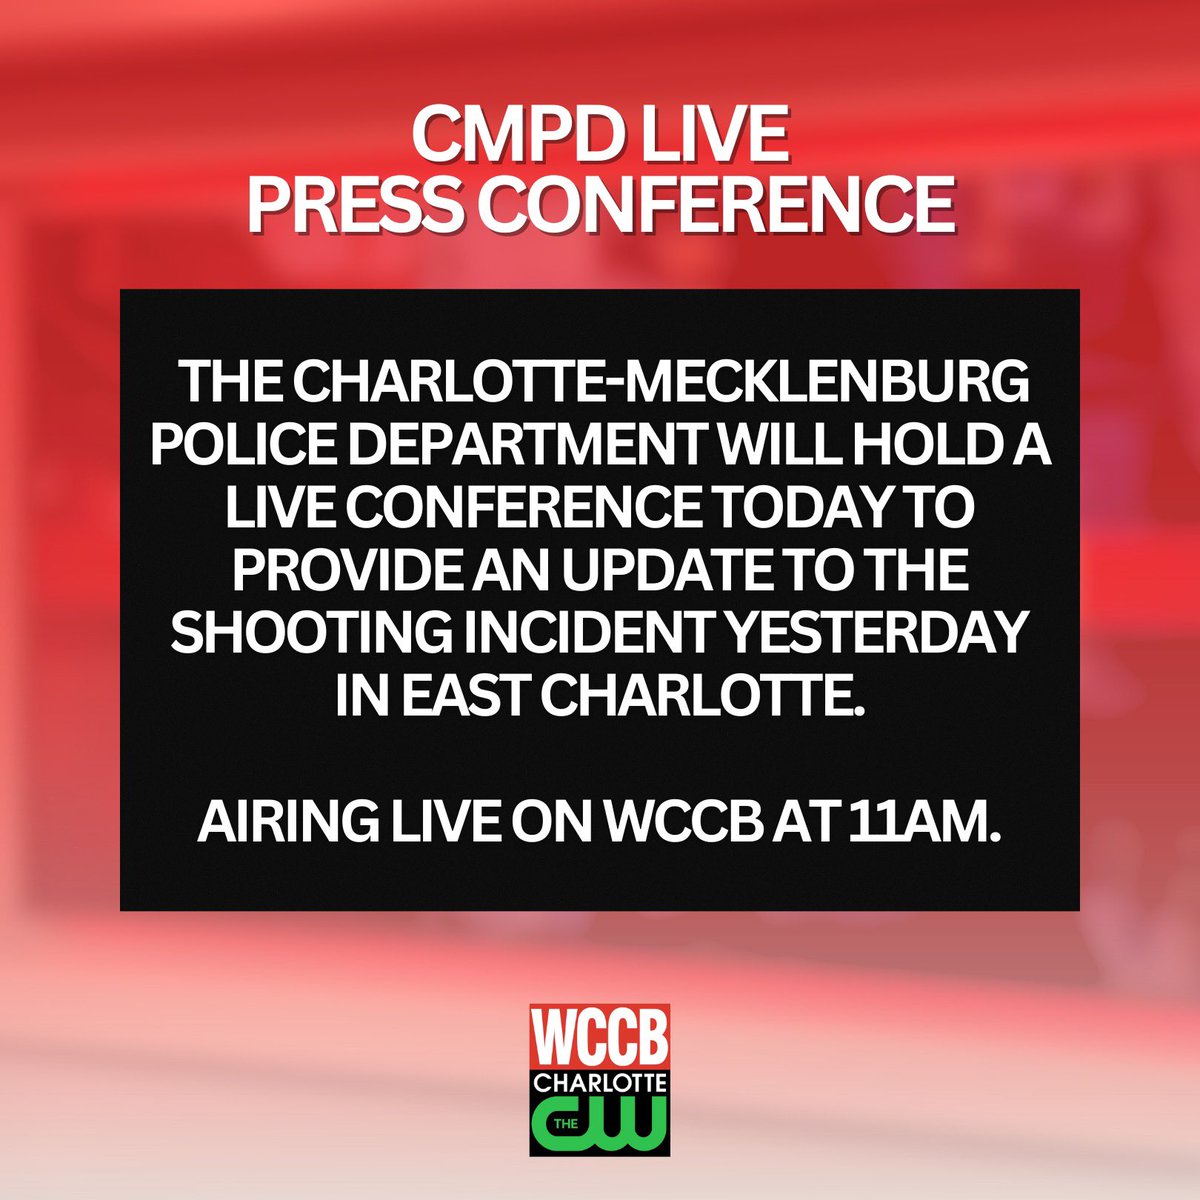 CMPD will provide an update to yesterday's tragic events in a live press conference this morning. Tune in on WCCB at 11AM.